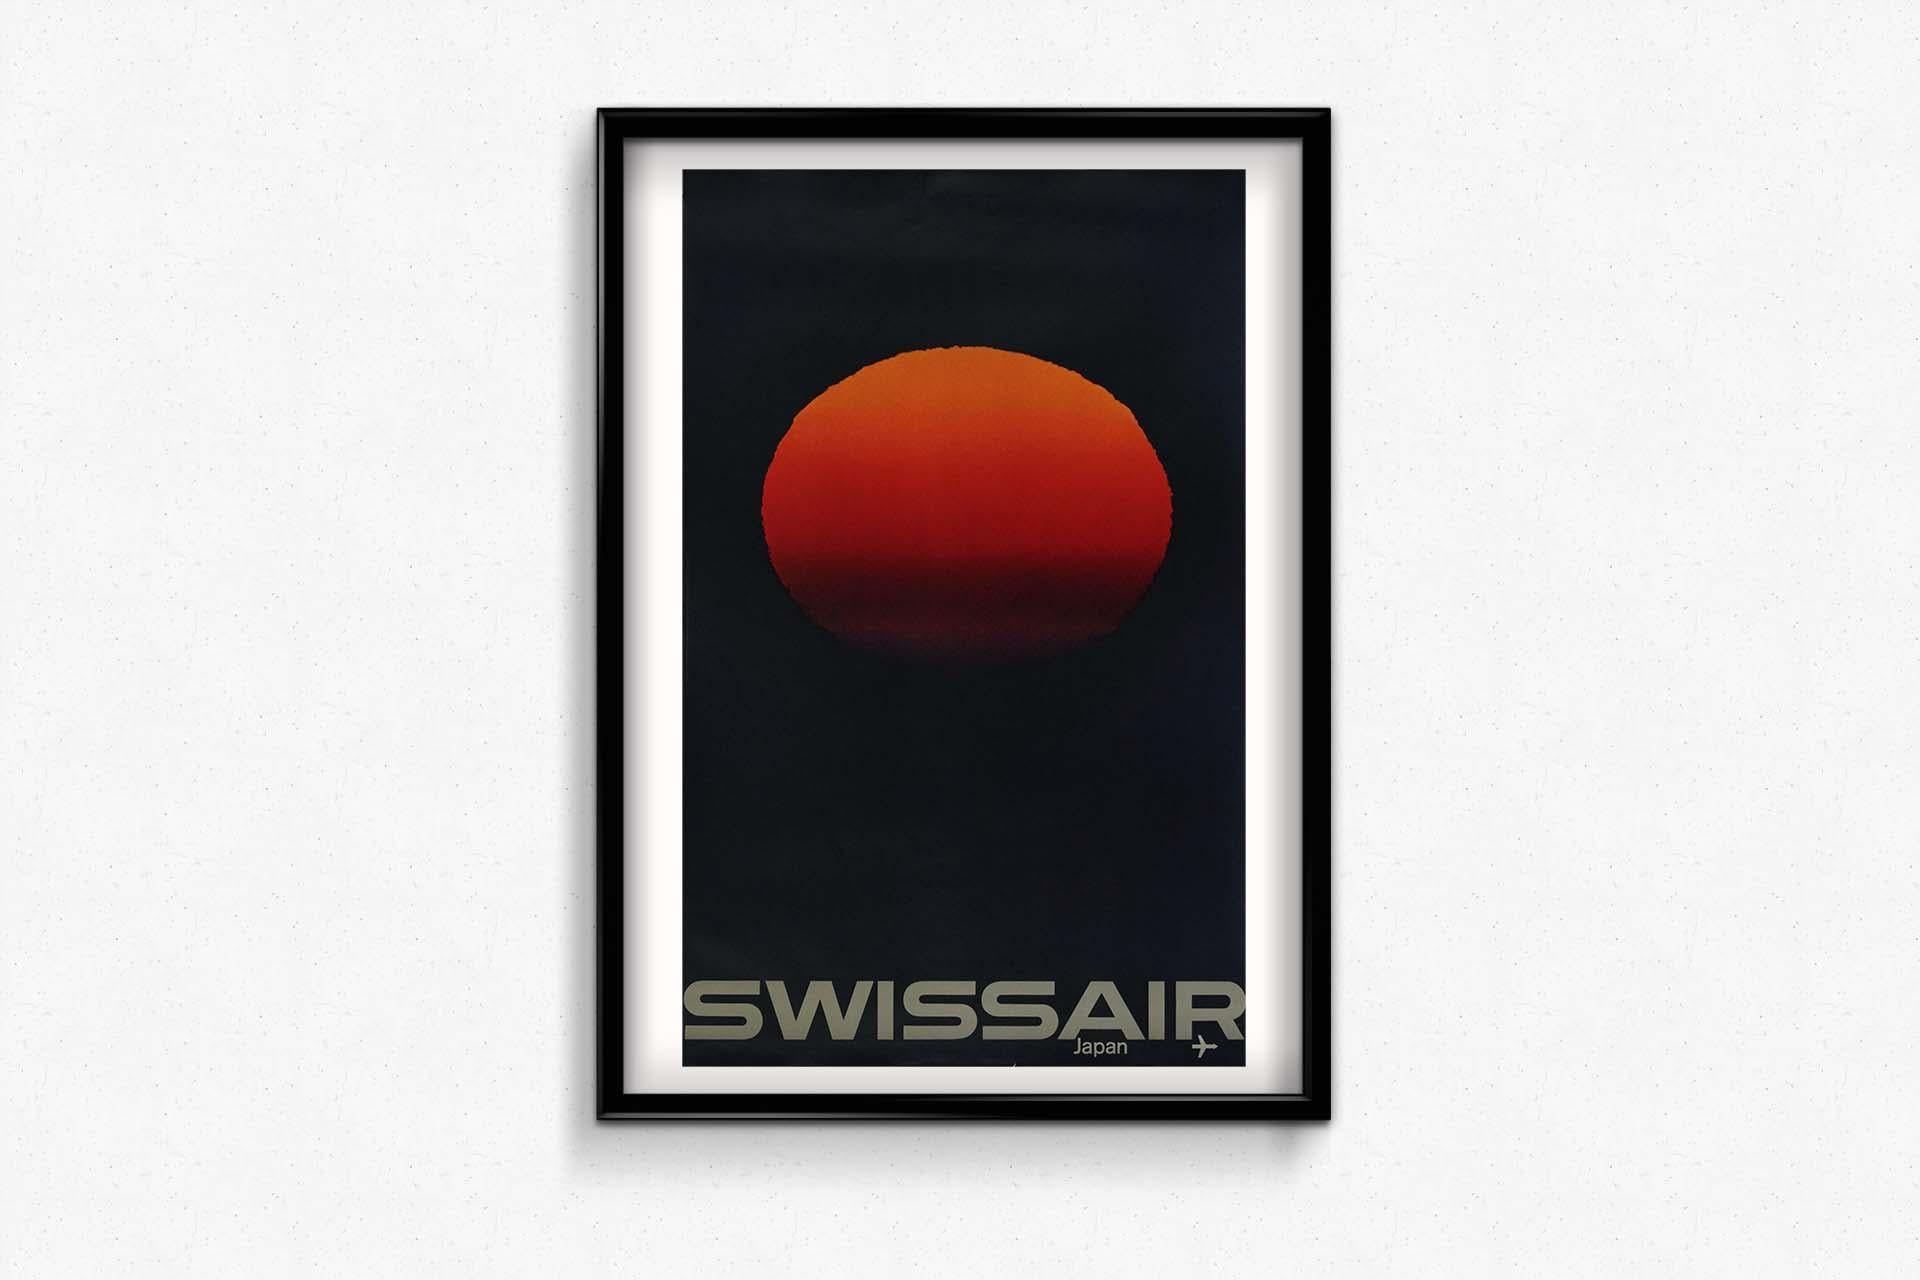 The 1964 original travel poster by Manfred Bingler and Emil Schulthess for Swissair Japan captures the essence of Japan's cultural allure and natural beauty with a clever depiction of a sunset mirroring the Japanese flag.

In this captivating